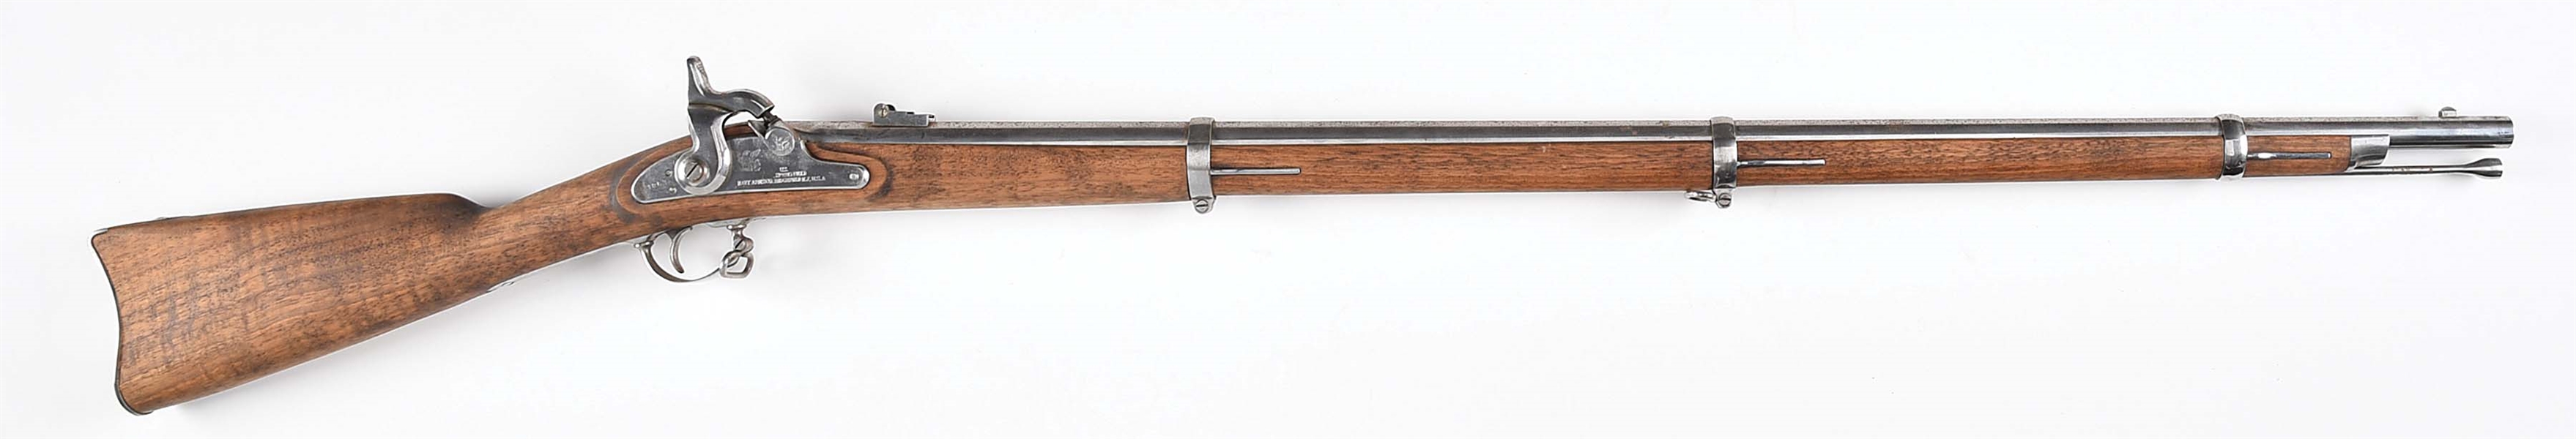 (A) NAVY ARMS REPRODUCTION MODEL 1863 SPRINGFIELD PERCUSSION MUSKET.